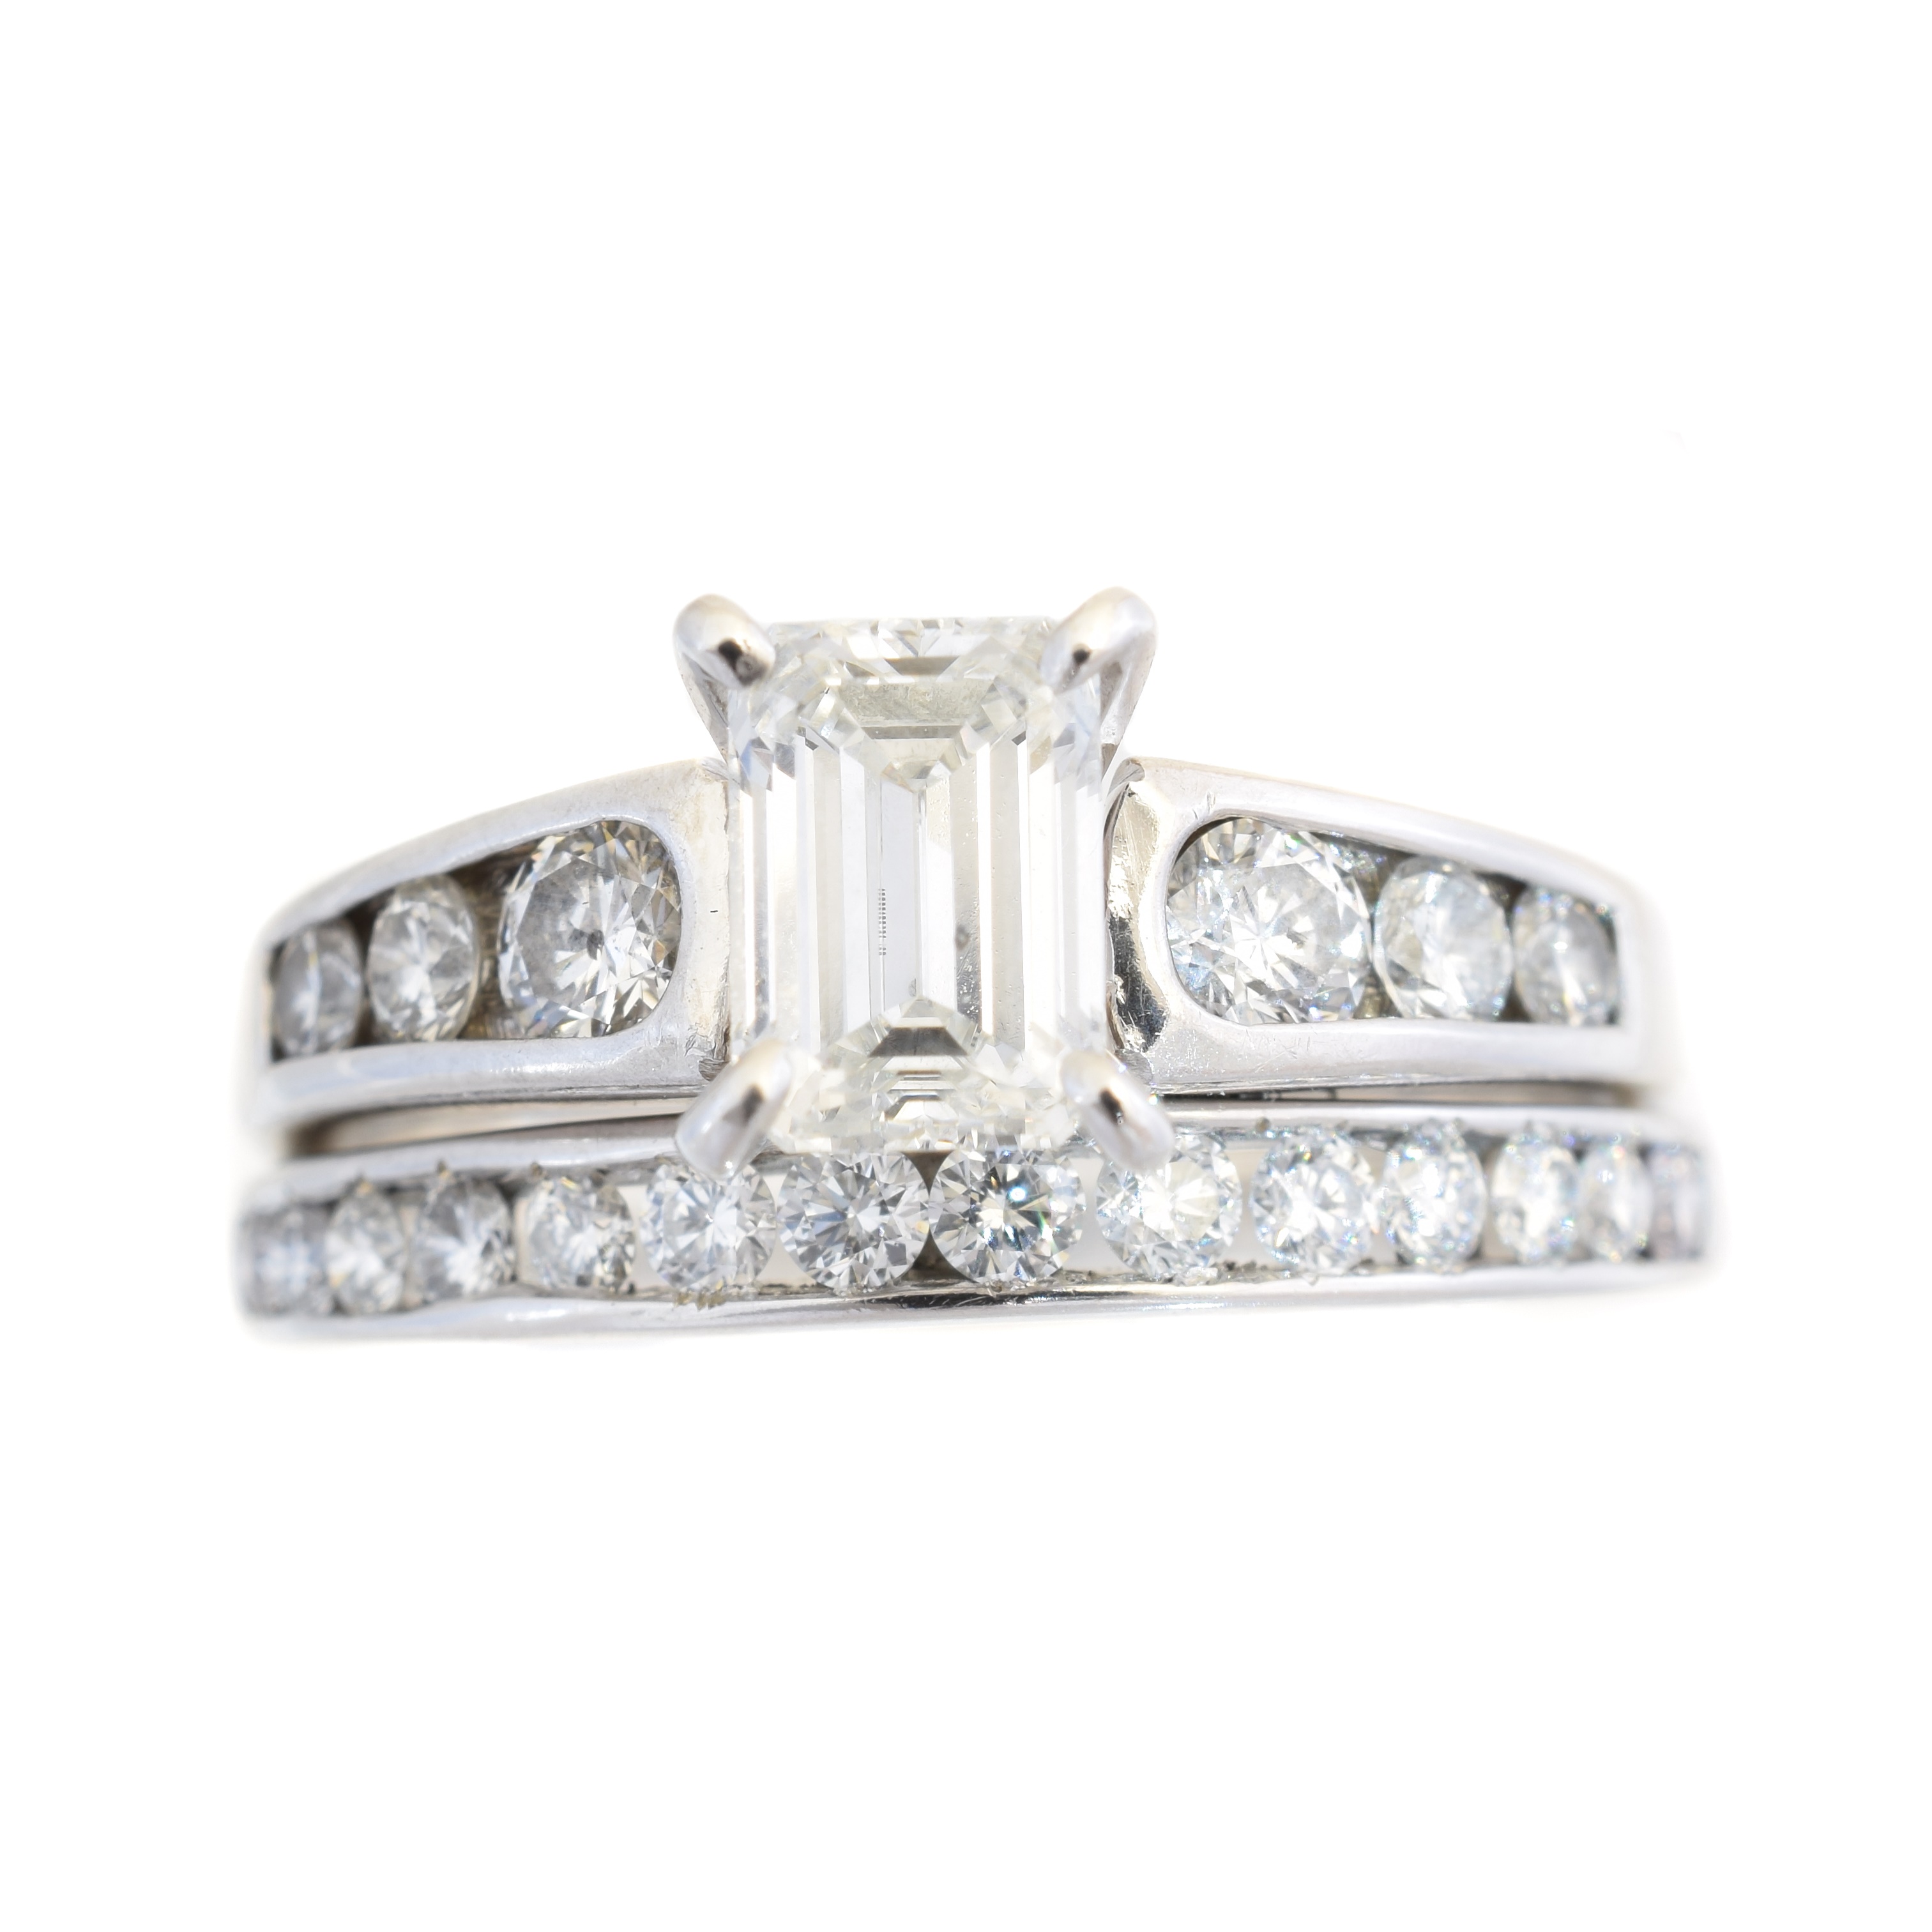 A diamond dress ring, the emerald cut diamond weighing 1.06cts with brilliant cut diamond shoulders and similarly cut adjoined diamond band, principal diamond with GSI 15708103301 inscription to girdle, relating to a certificate from Gemological Science International dated 2016 stating that the diamond is G colour, SI1 clarity, estimated total diamond weight 2cts, bands stamped 14k and 18k, ring size O, gross weight 6.4g.